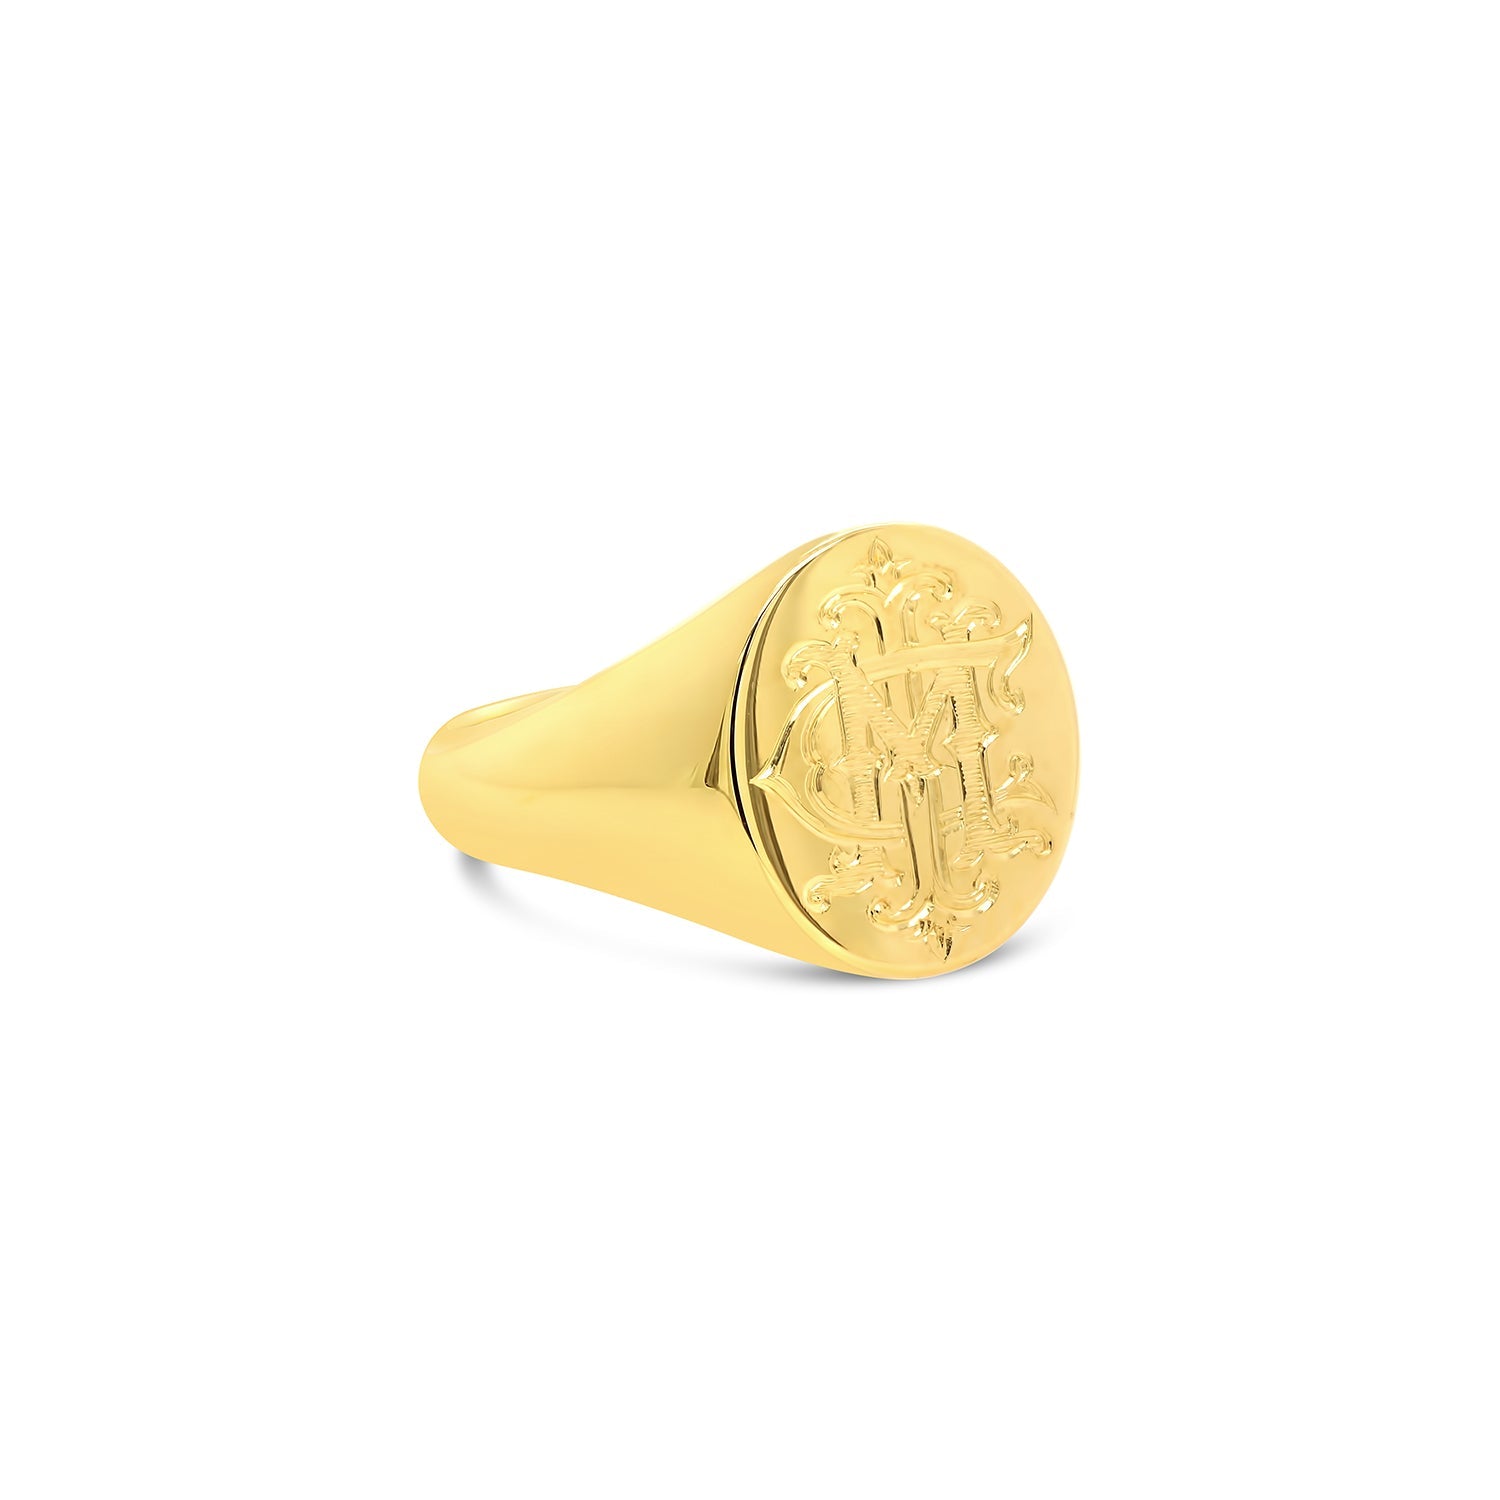  Oval Gold Signet Ring